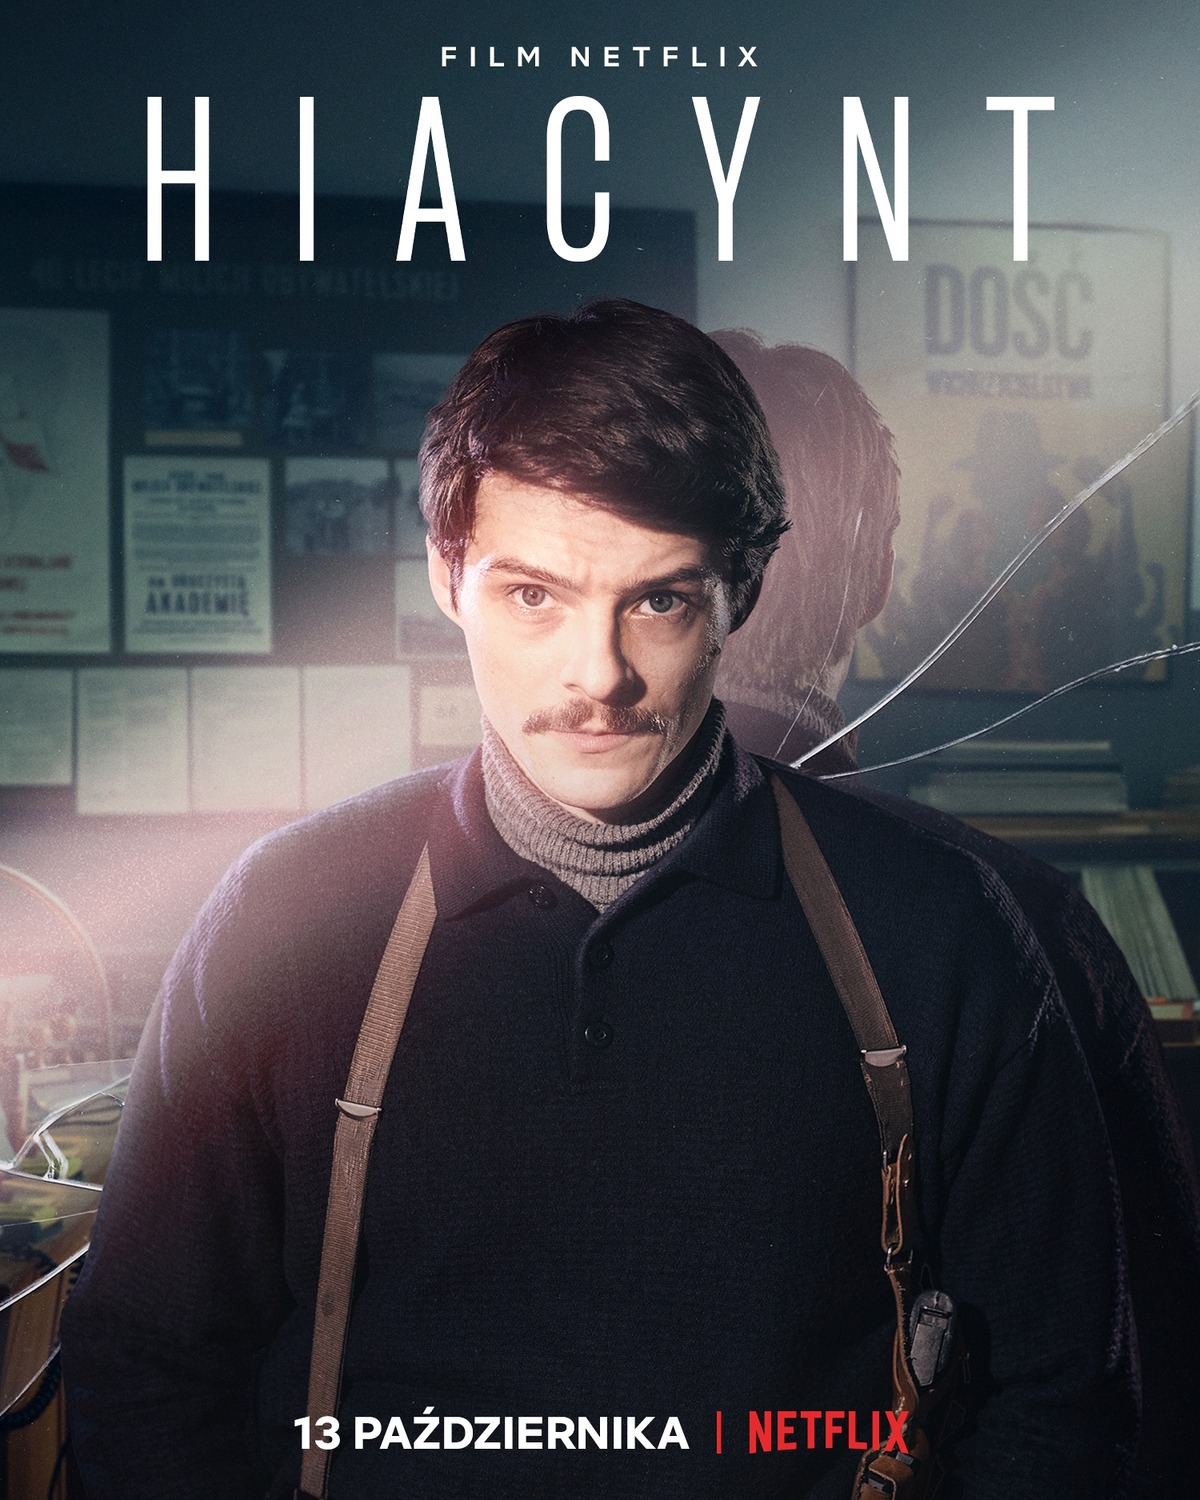 Extra Large Movie Poster Image for Hiacynt 